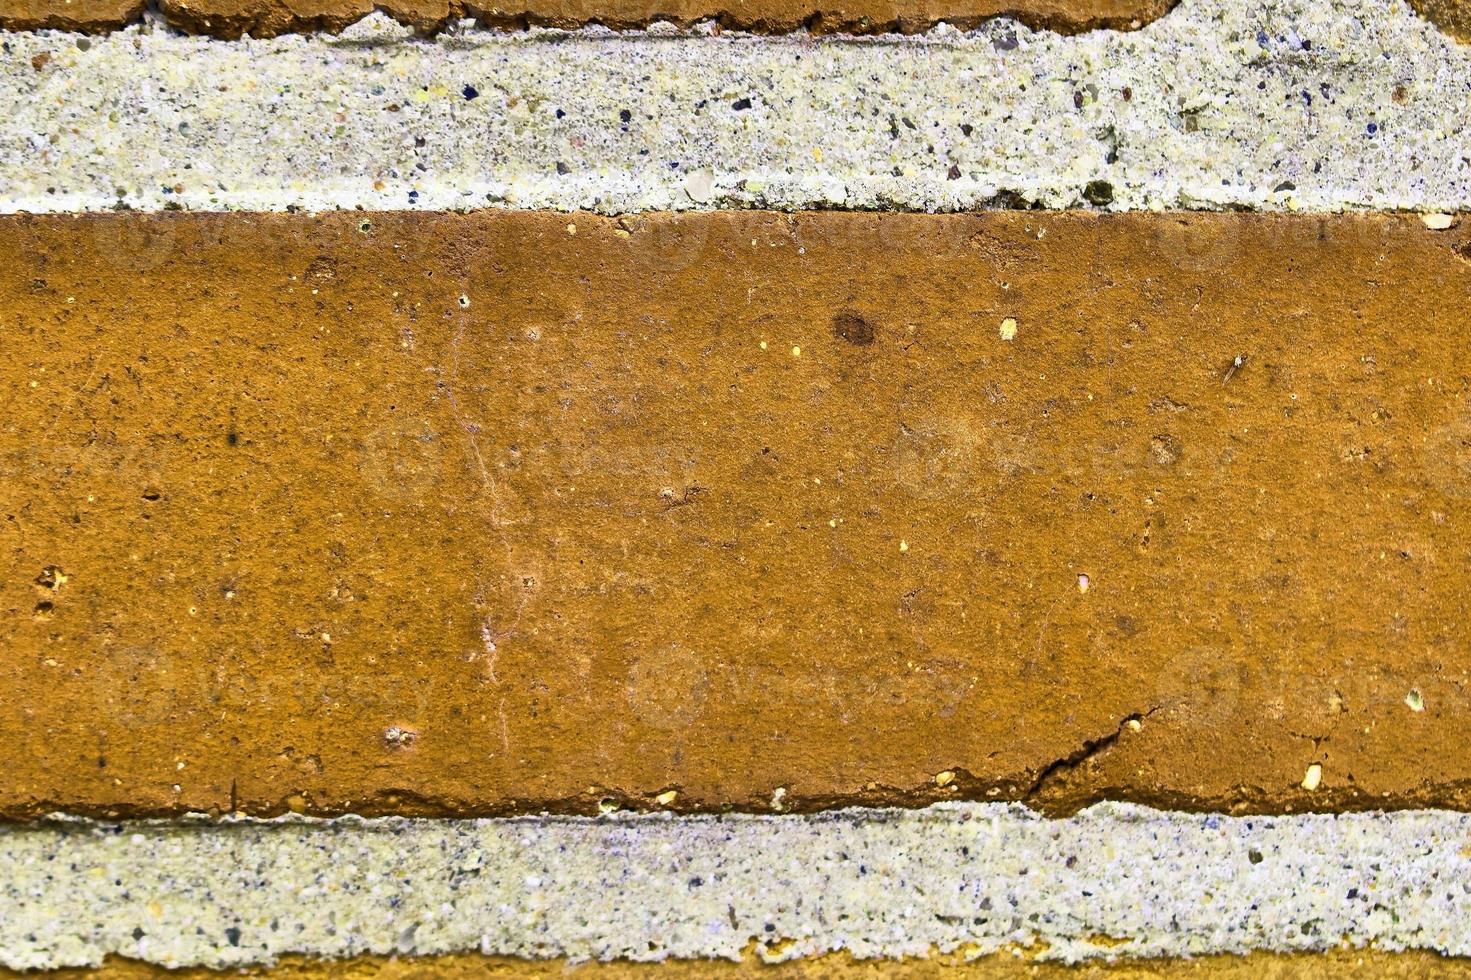 Detailed view at a colorful old and weathered brick wall texture as a panoramic background. photo